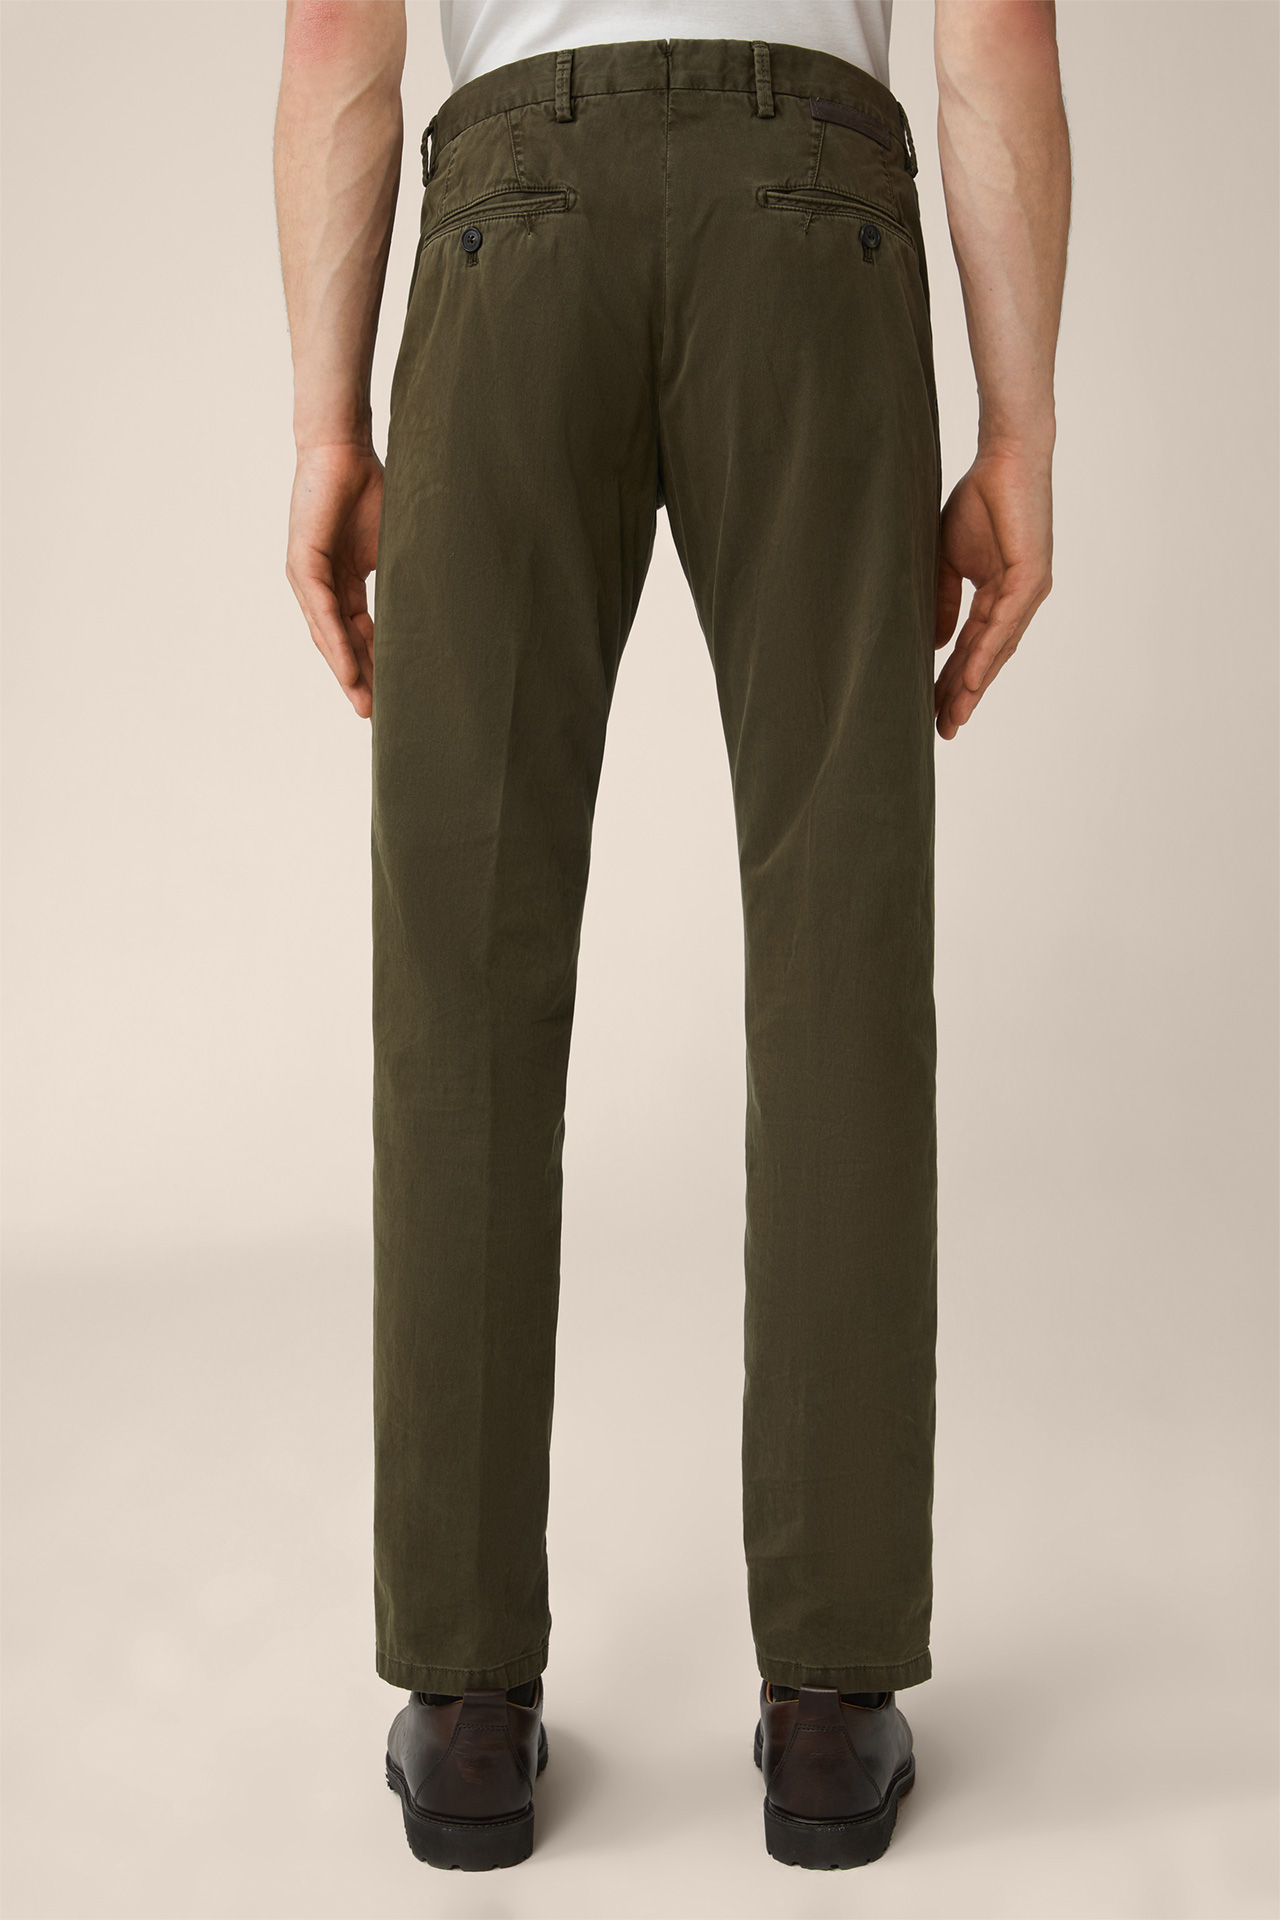 Cino Cotton Chinos in Olive